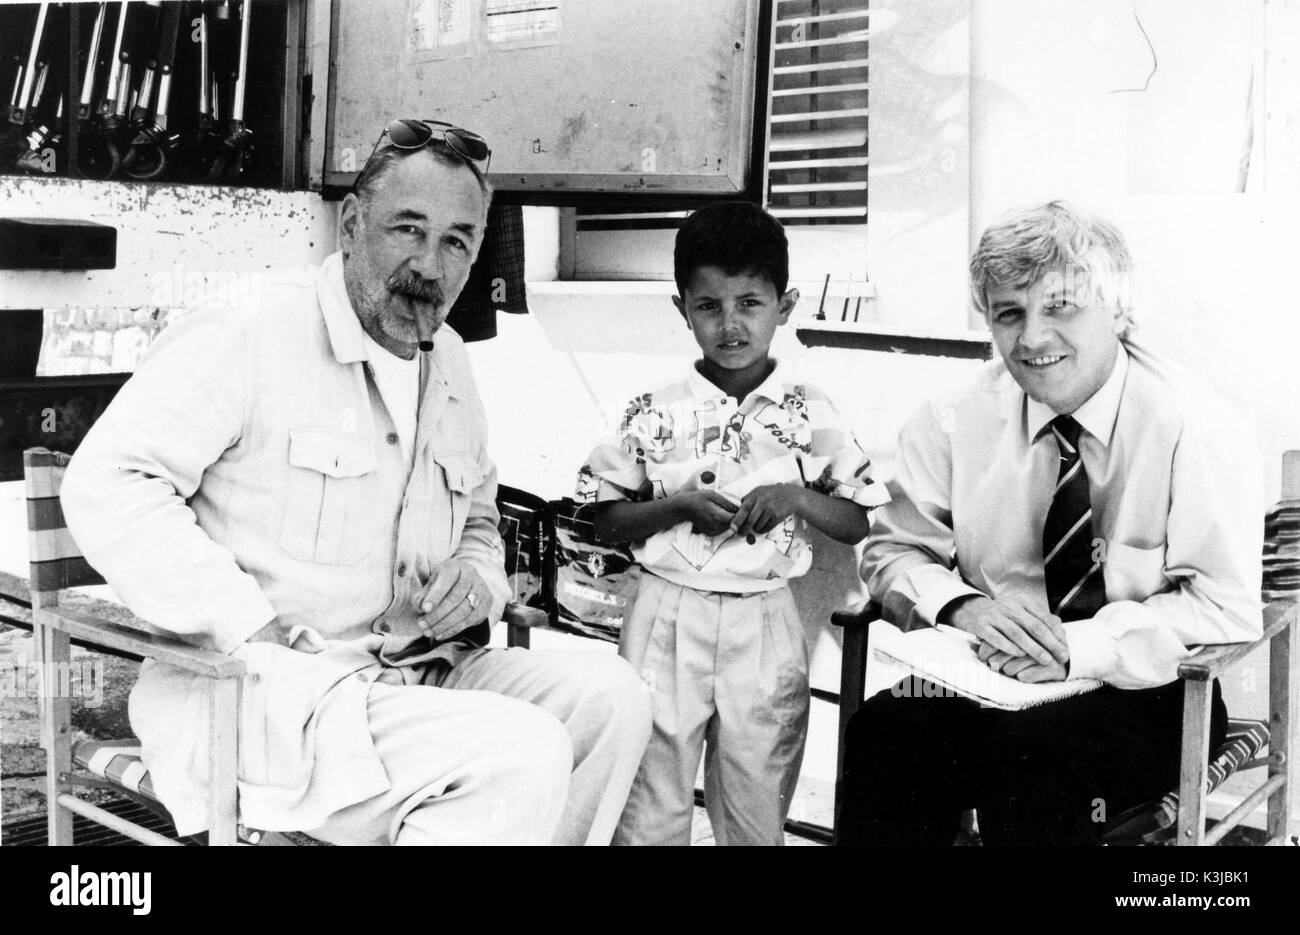 NUOVO CINEMA PARADISO aka CINEMA PARADISO From left - PHILIPPE NOIRET who plays the projectionist, SALVATORE CASCIO who is the main character Salvatore as a achild, JACQUES PERRIN is Salvatore as an adult Stock Photo